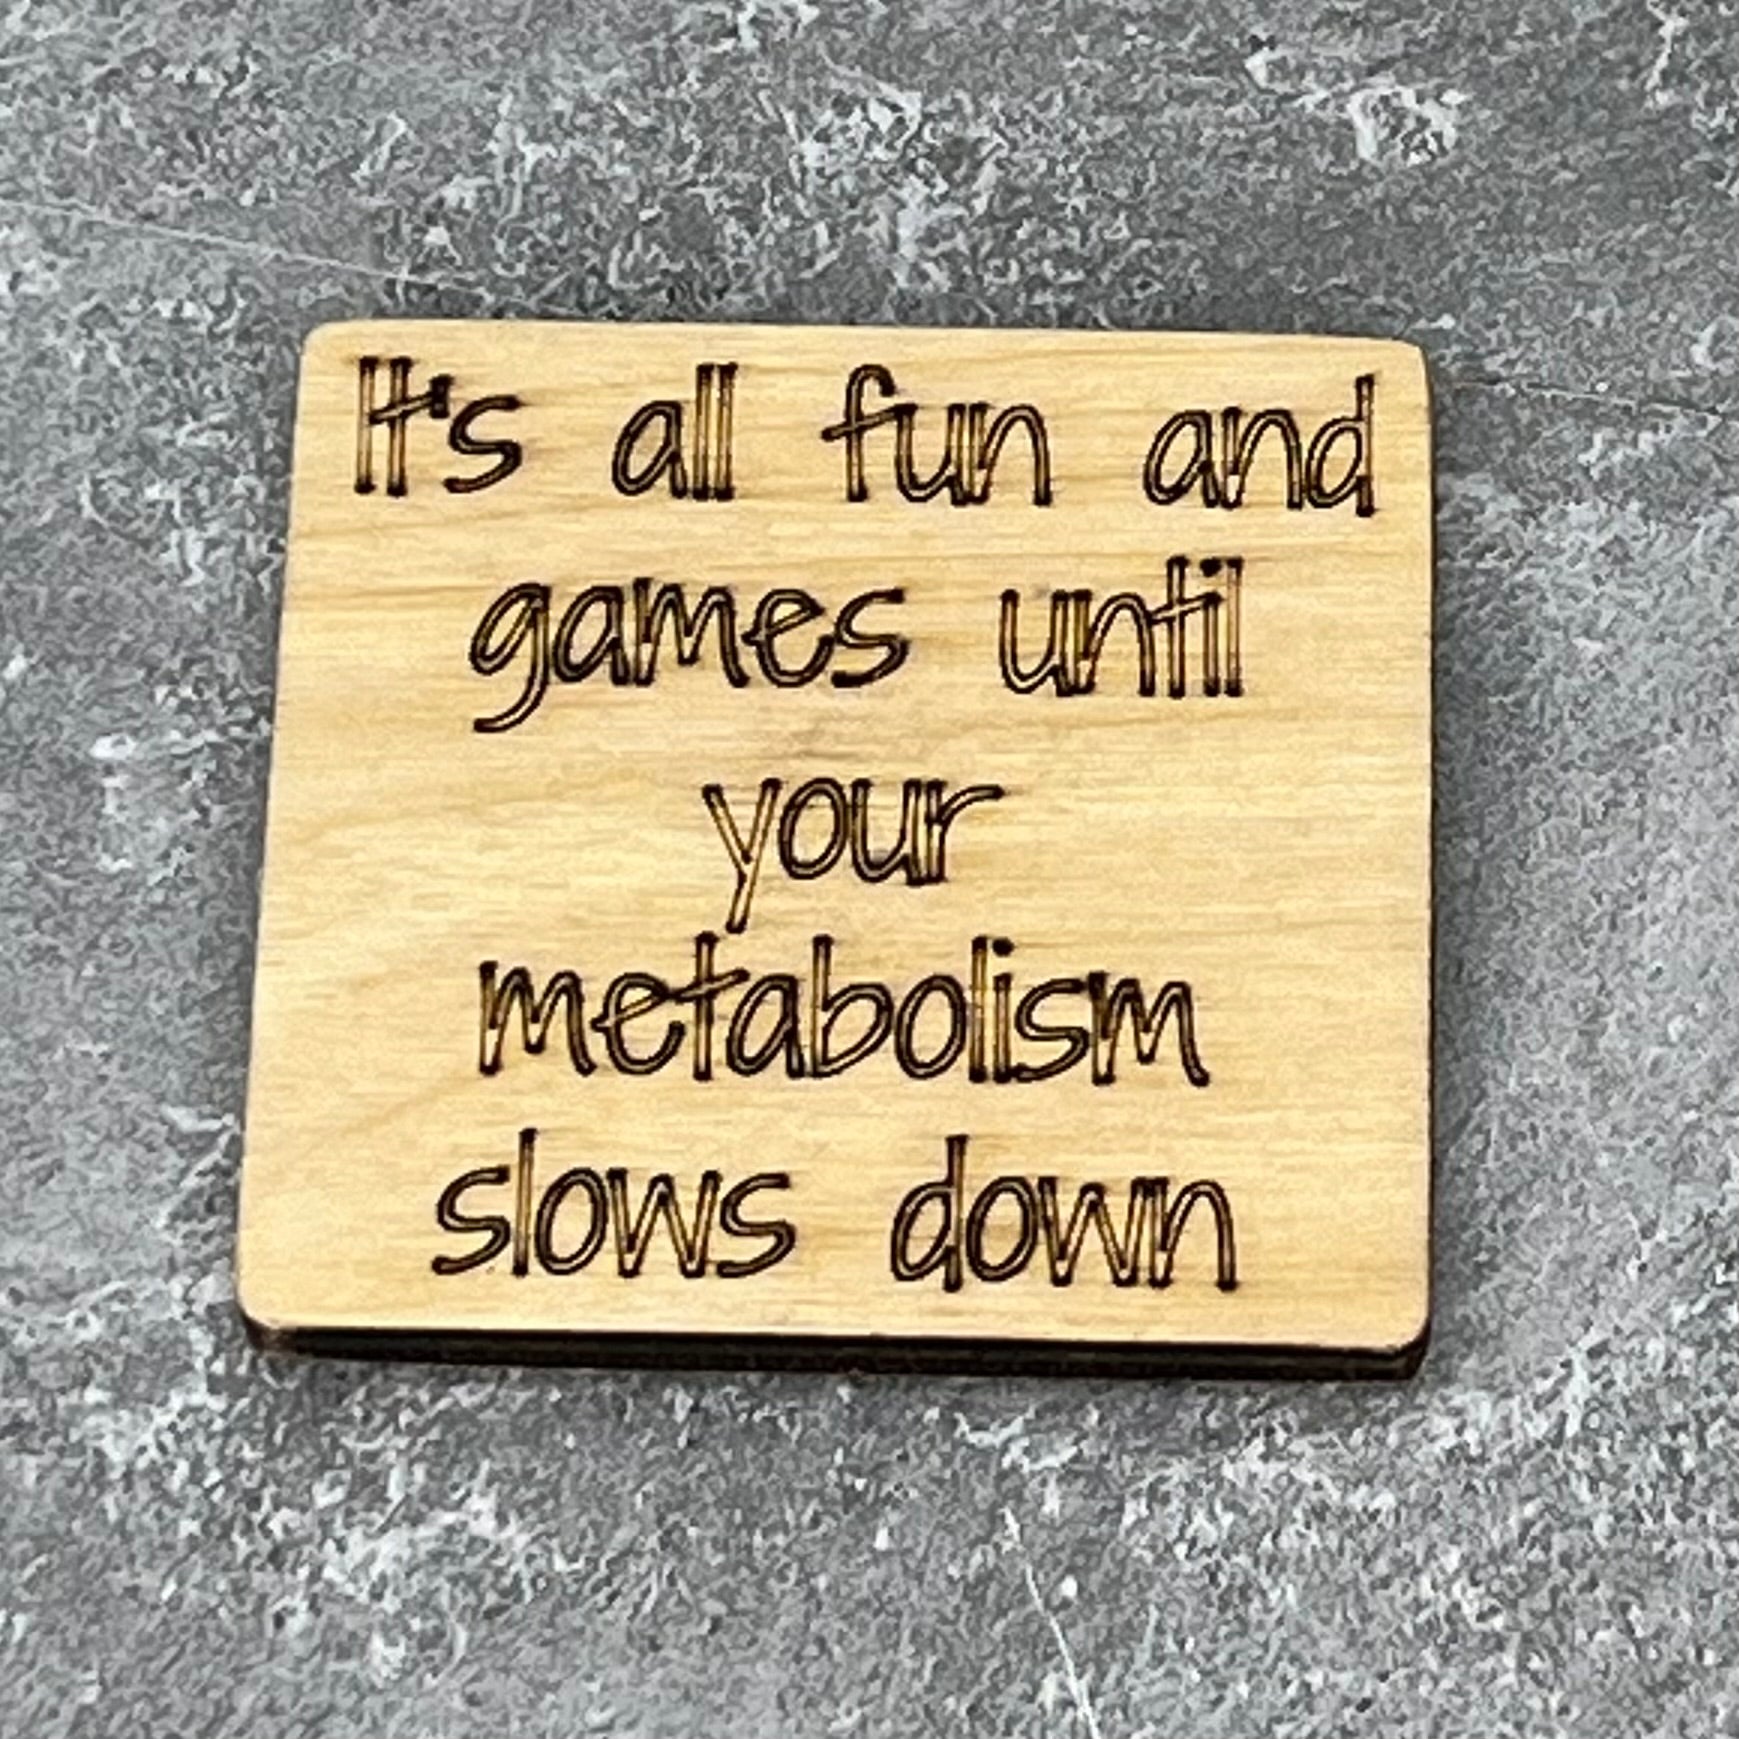 2" wood square with “It’s all fun and games until your metabolism slows down“ laser engraved